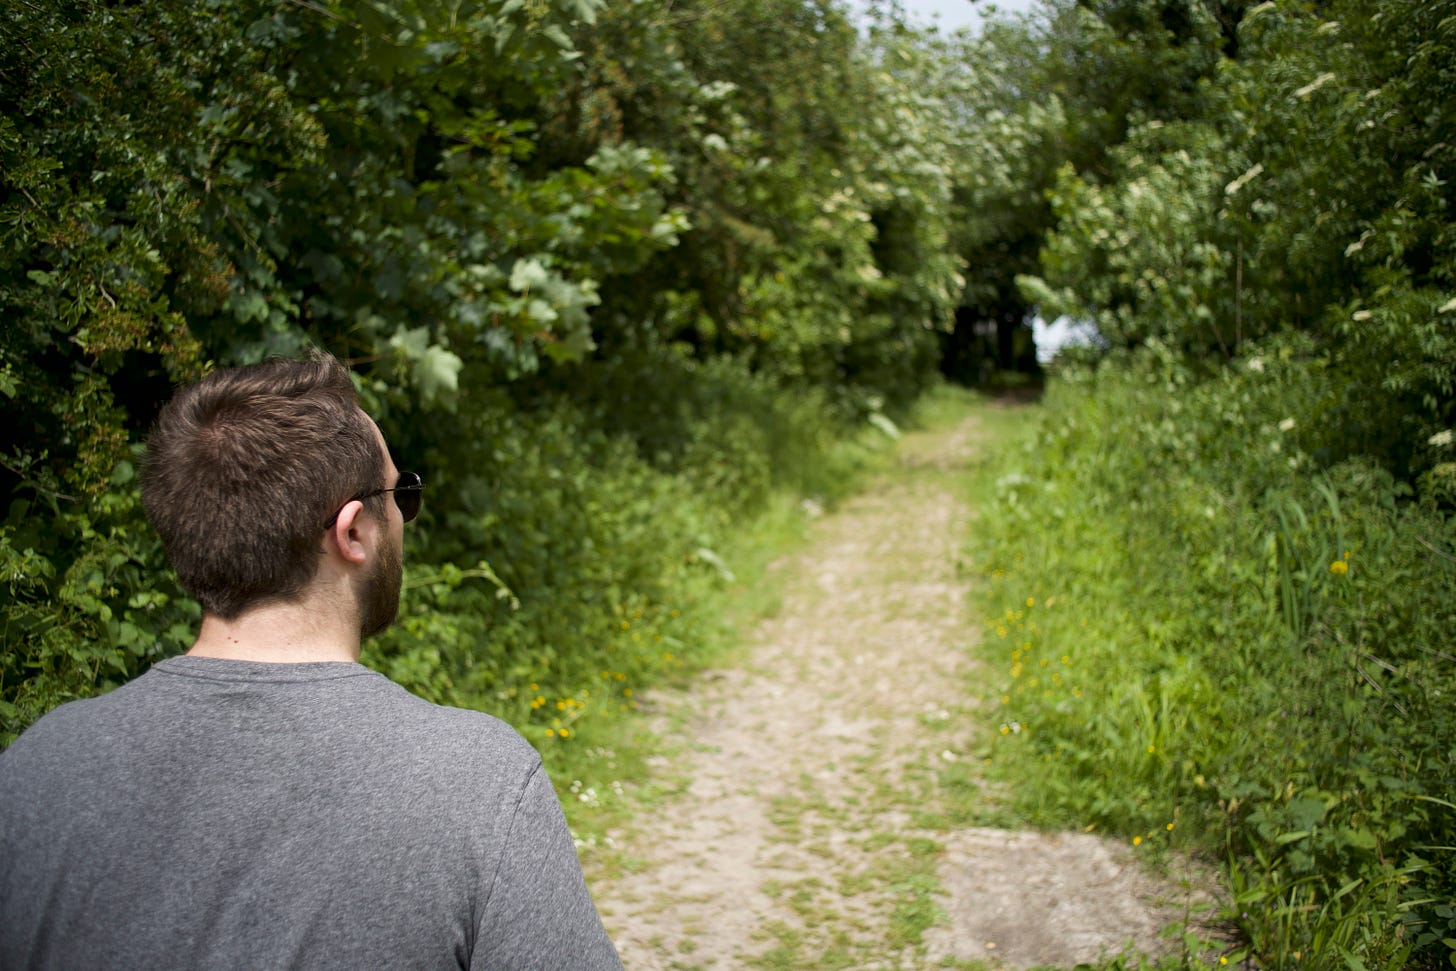 A photograph of a person with their back to the camera walking through a clearing in the woods. It is green, probably late spring or summer. The person is me. I'm wearing a grey t-shirt and sunglasses.